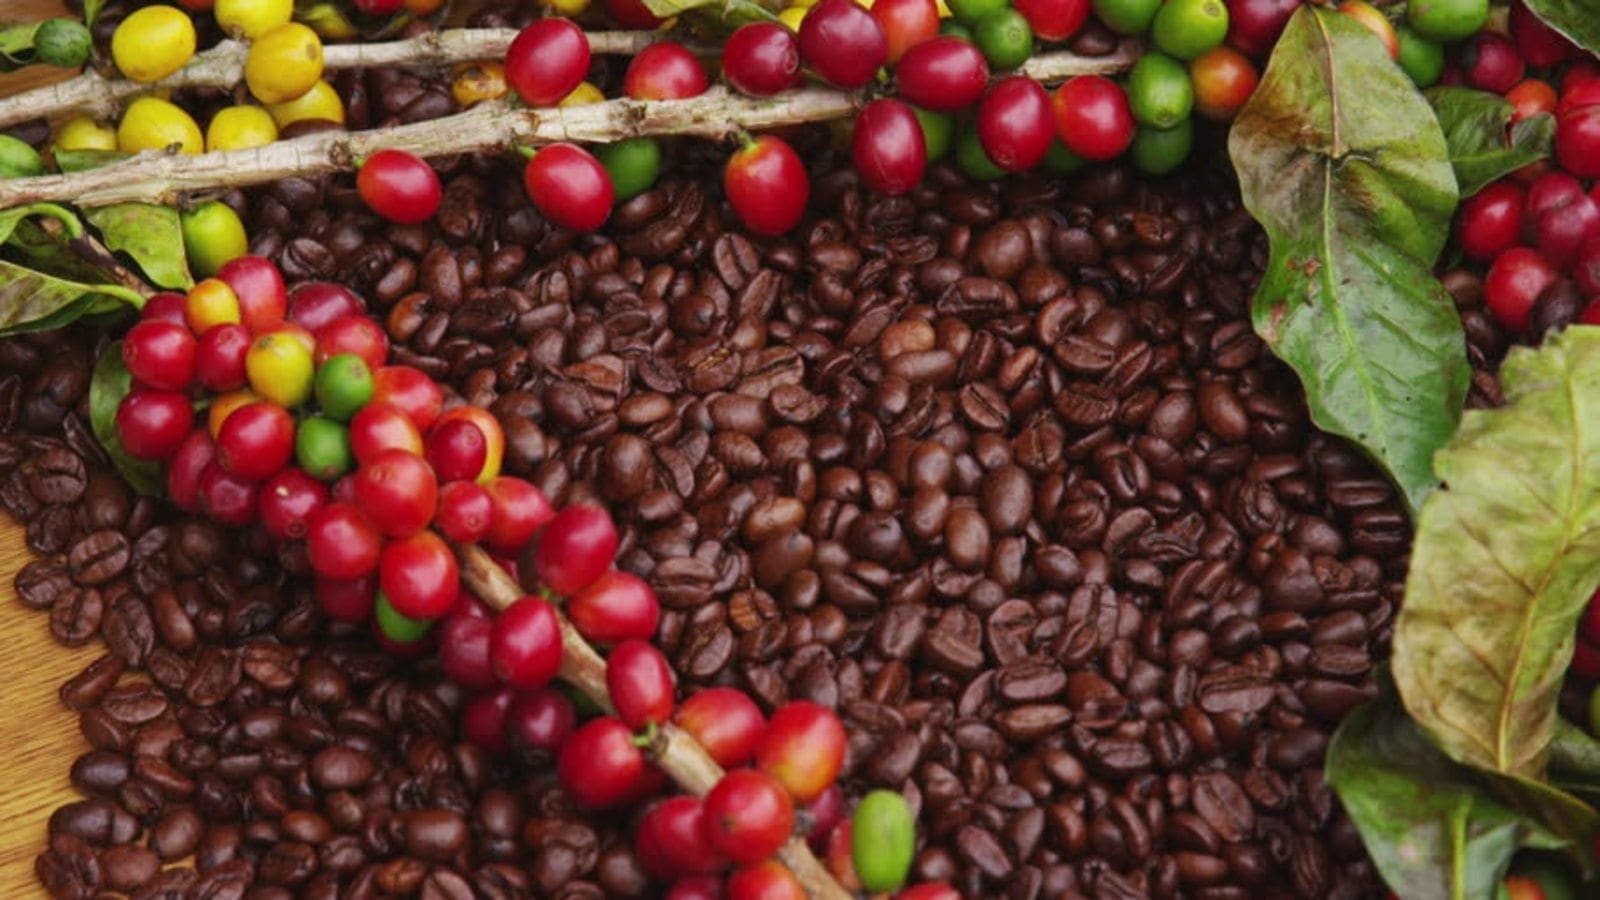 Private sector joins forces with UCDA to elevate Uganda’s coffee to world-class status